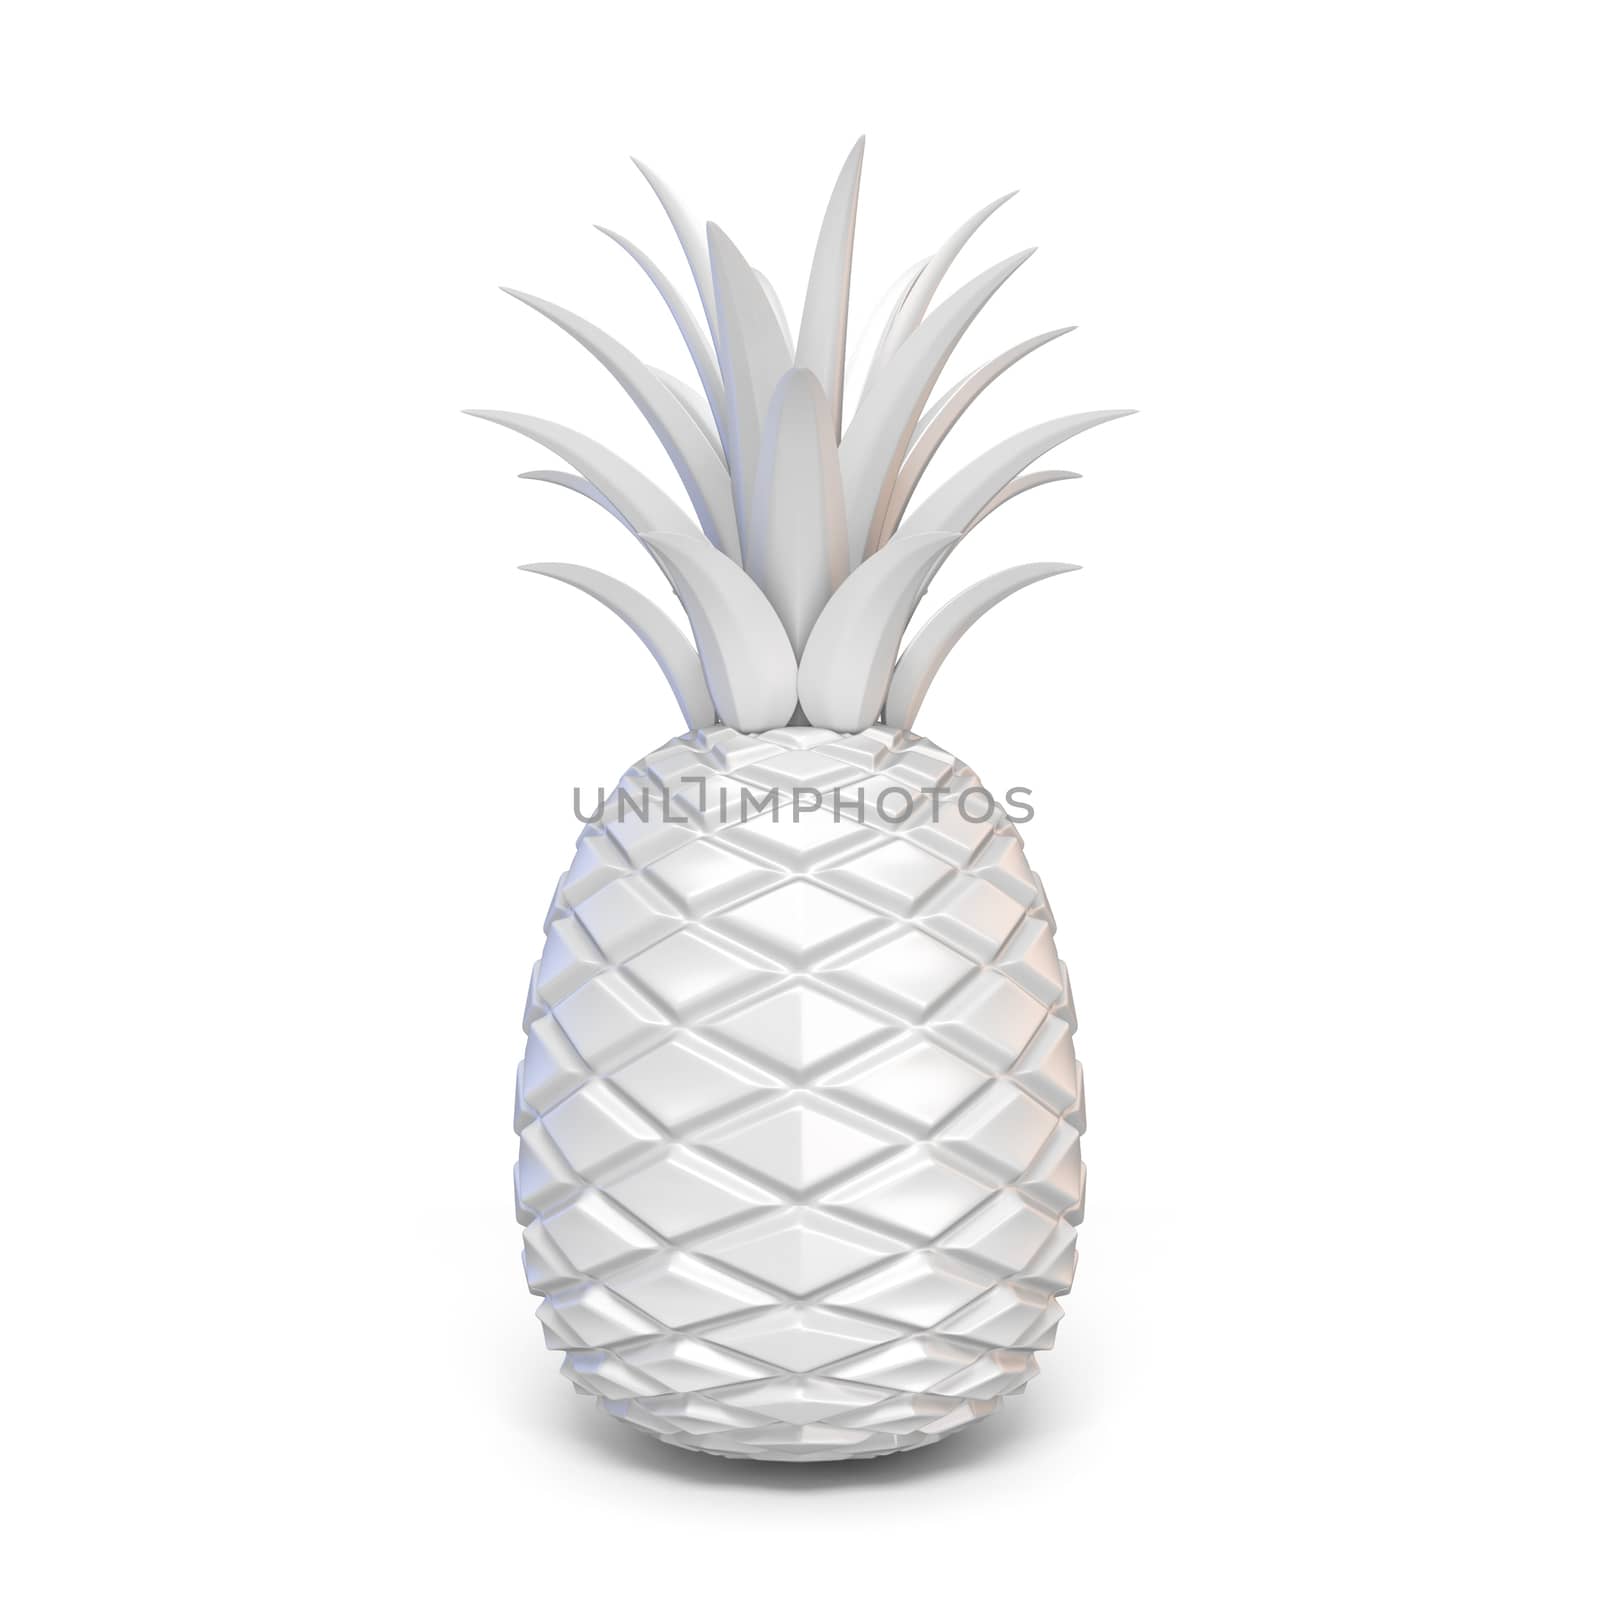 White abstract pineapple 3D rendering illustration isolated on white background